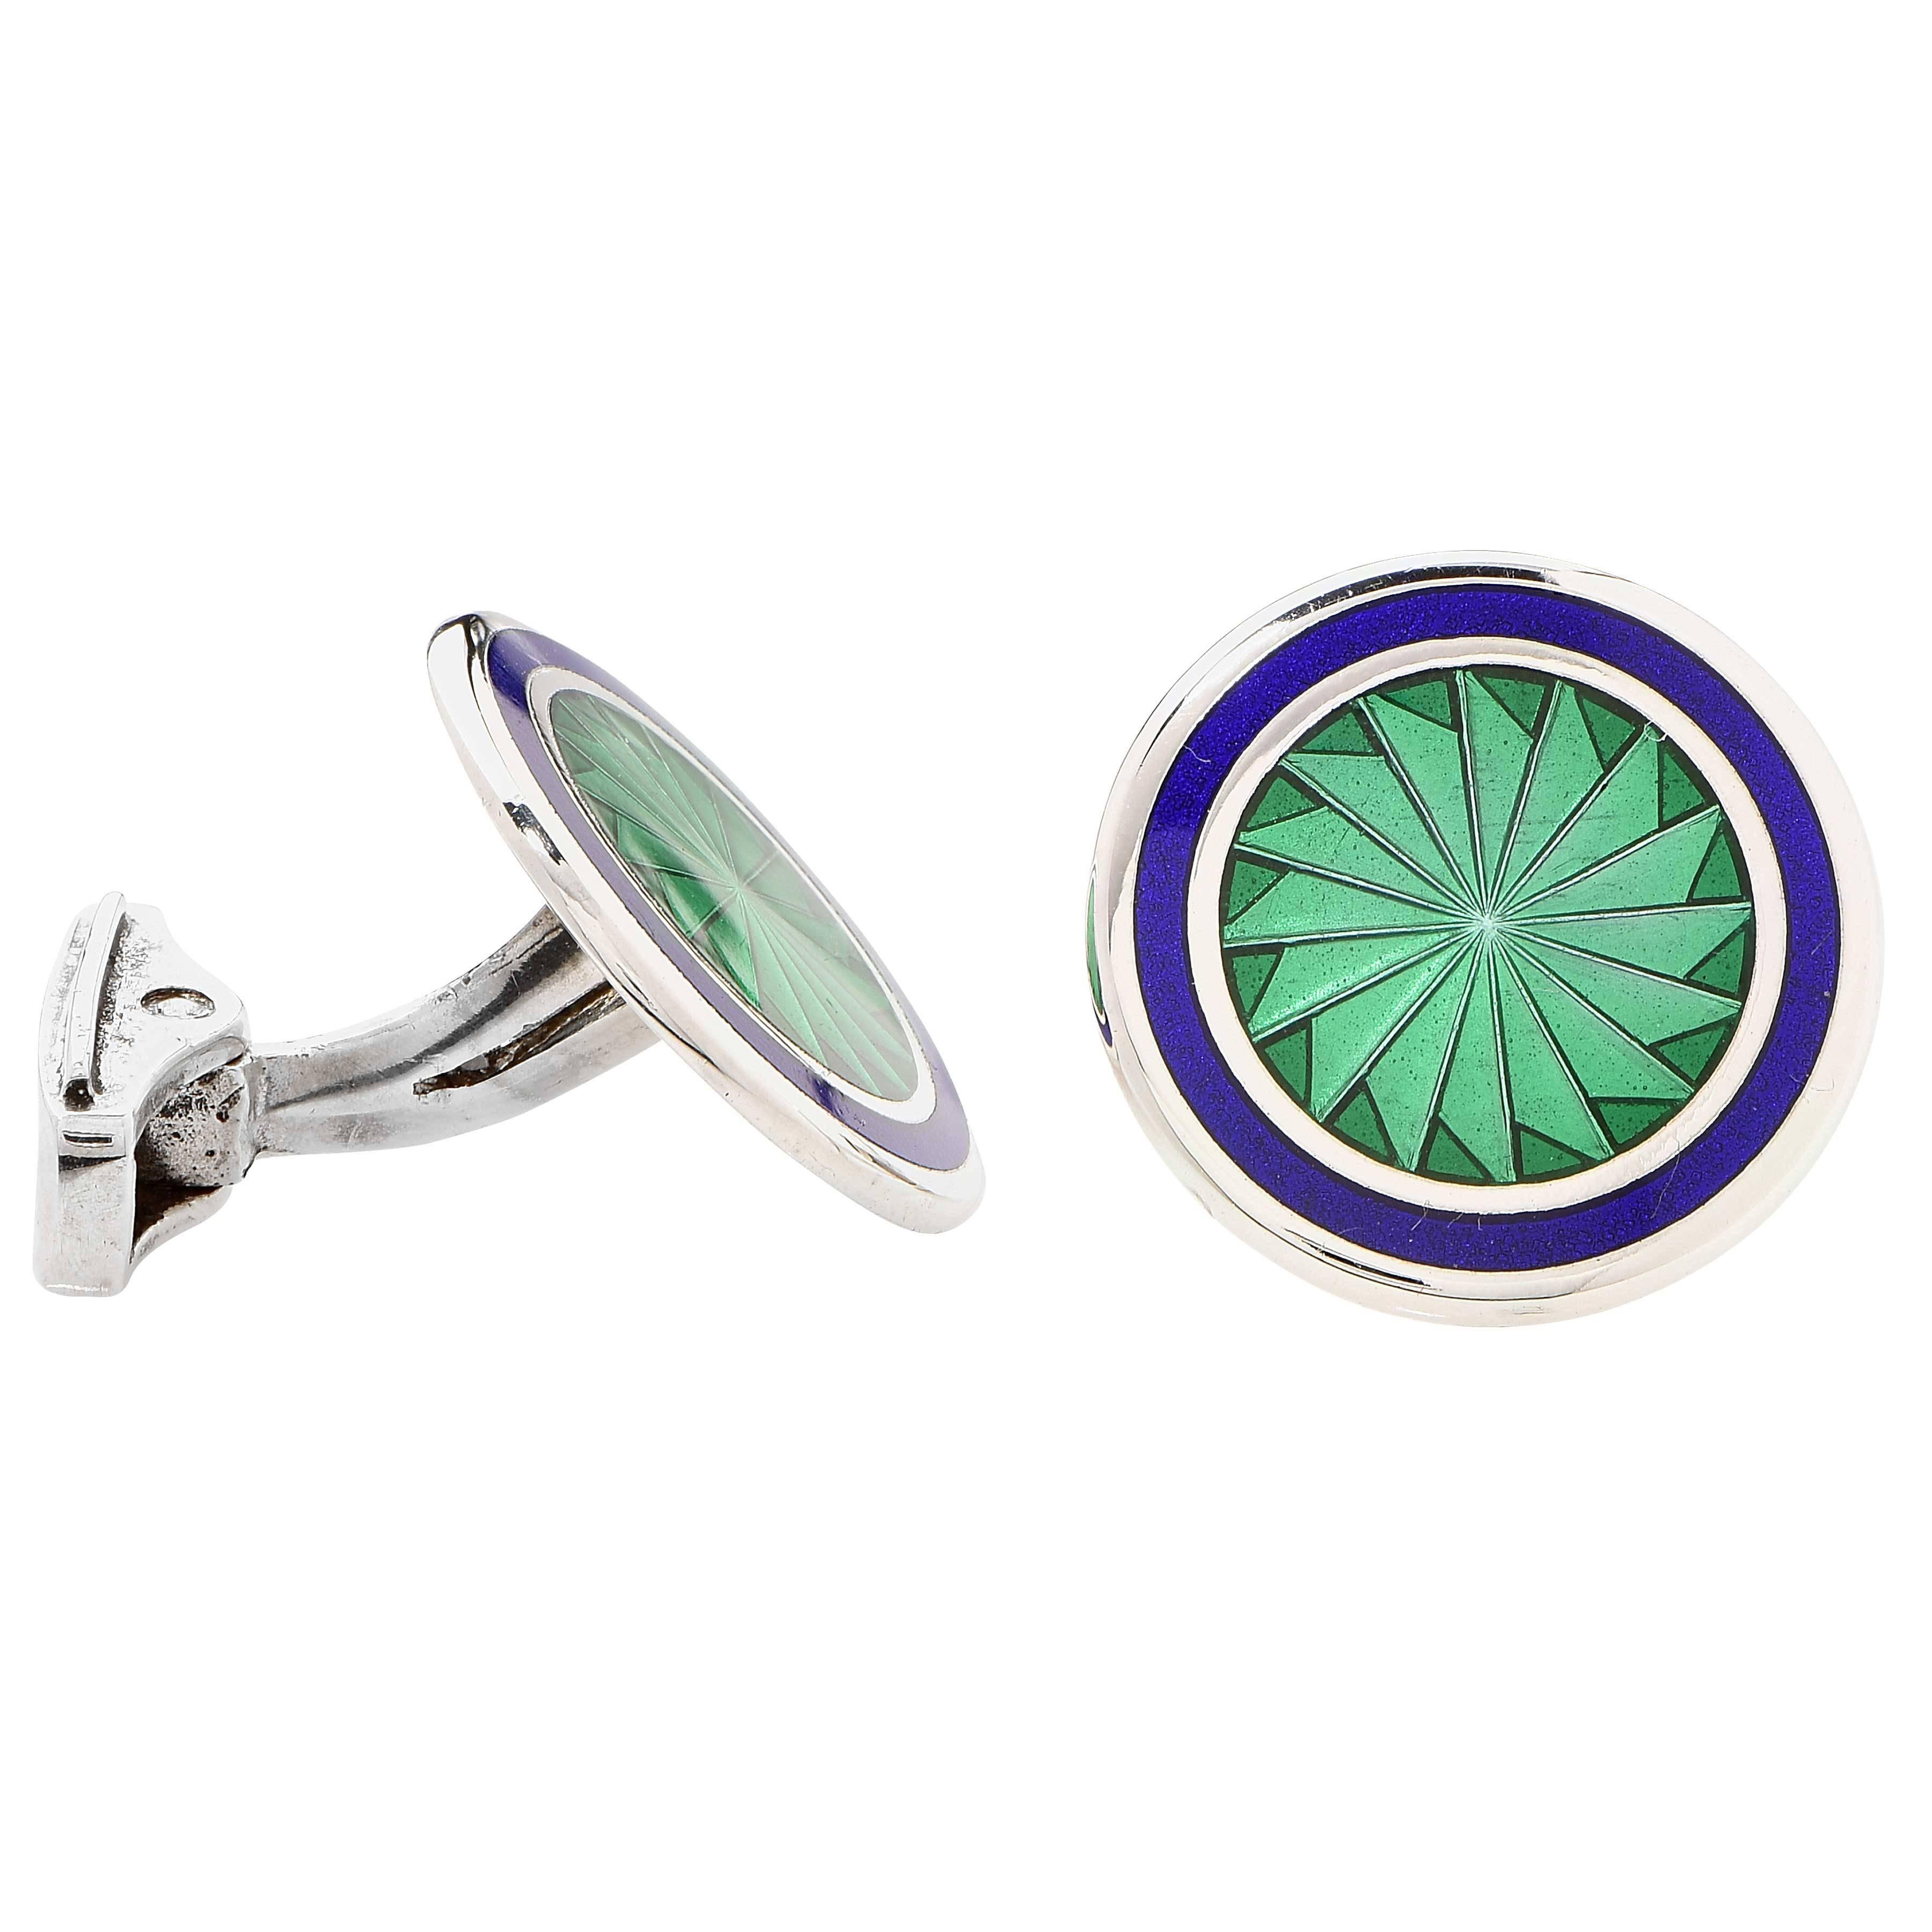 Brixton & Gill Sterling Silver Cufflinks with enamel front. Classic large swivel bar secures these cufflinks.

Metal: Sterling Silver
Metal Weight: 11.6 Grams